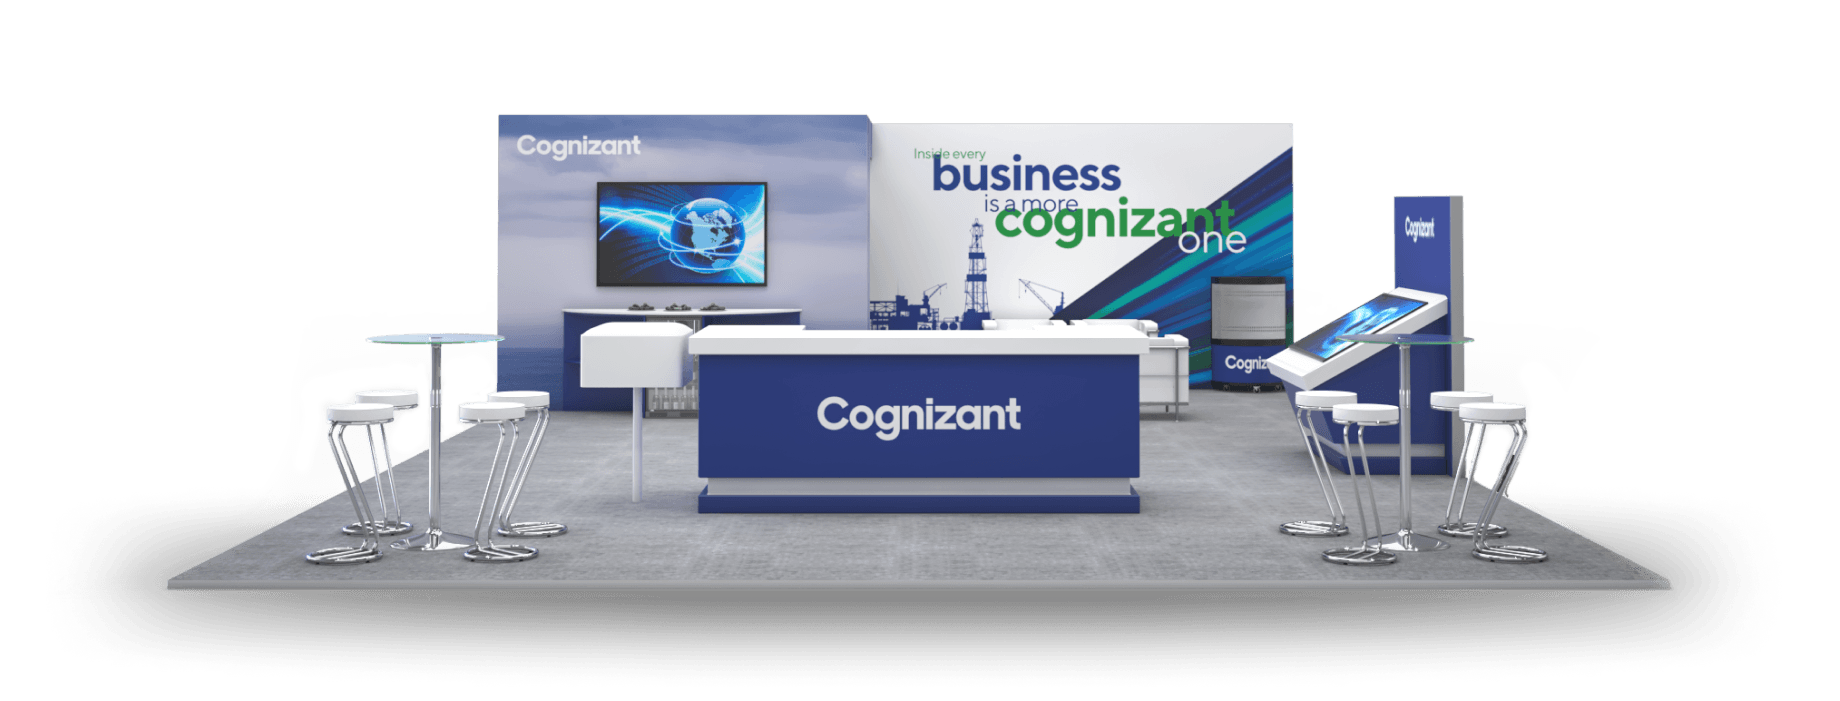 Stand Cognizant